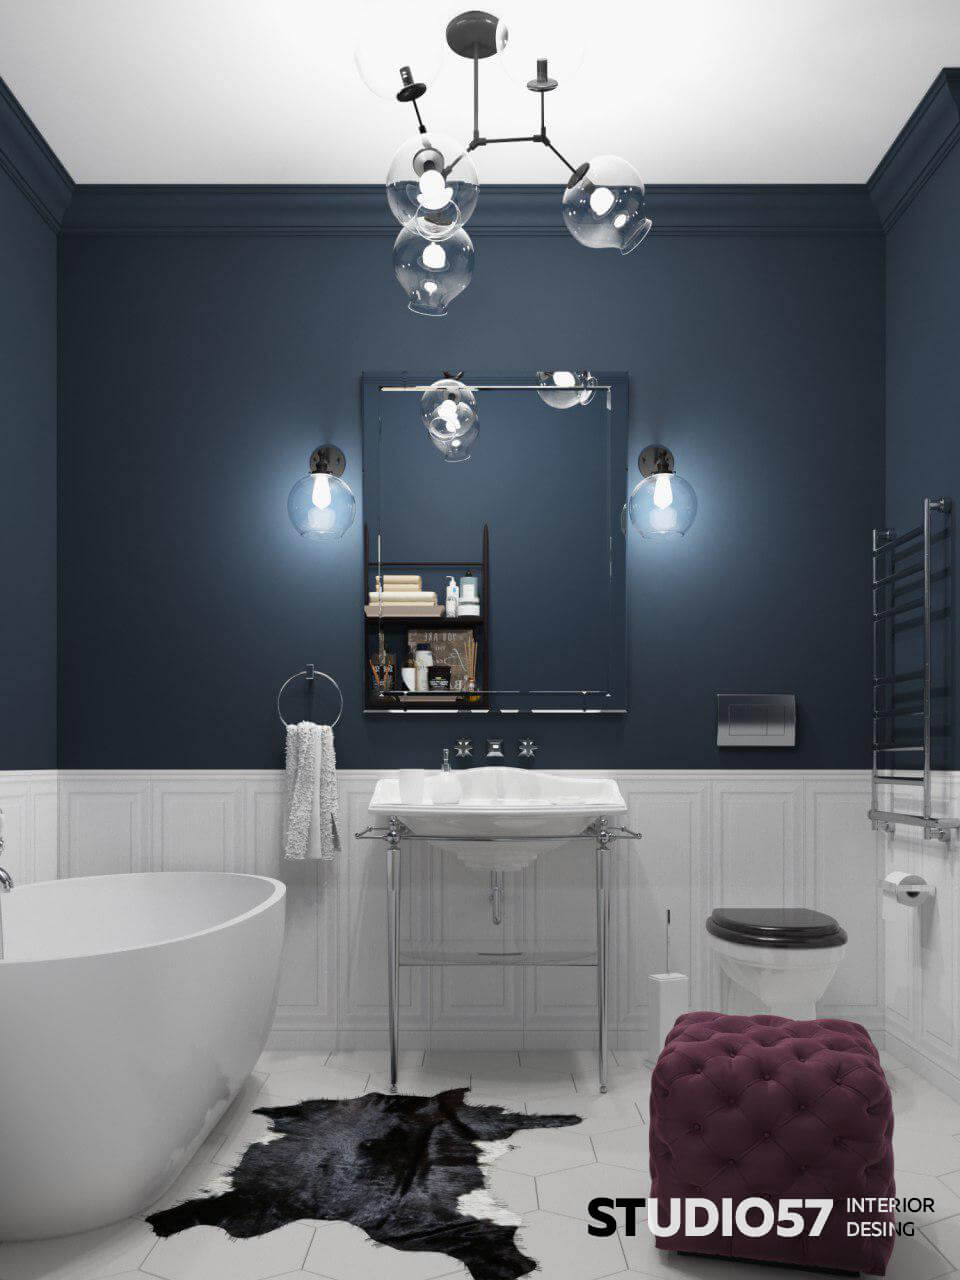 Burgundy and blue in the bathroom